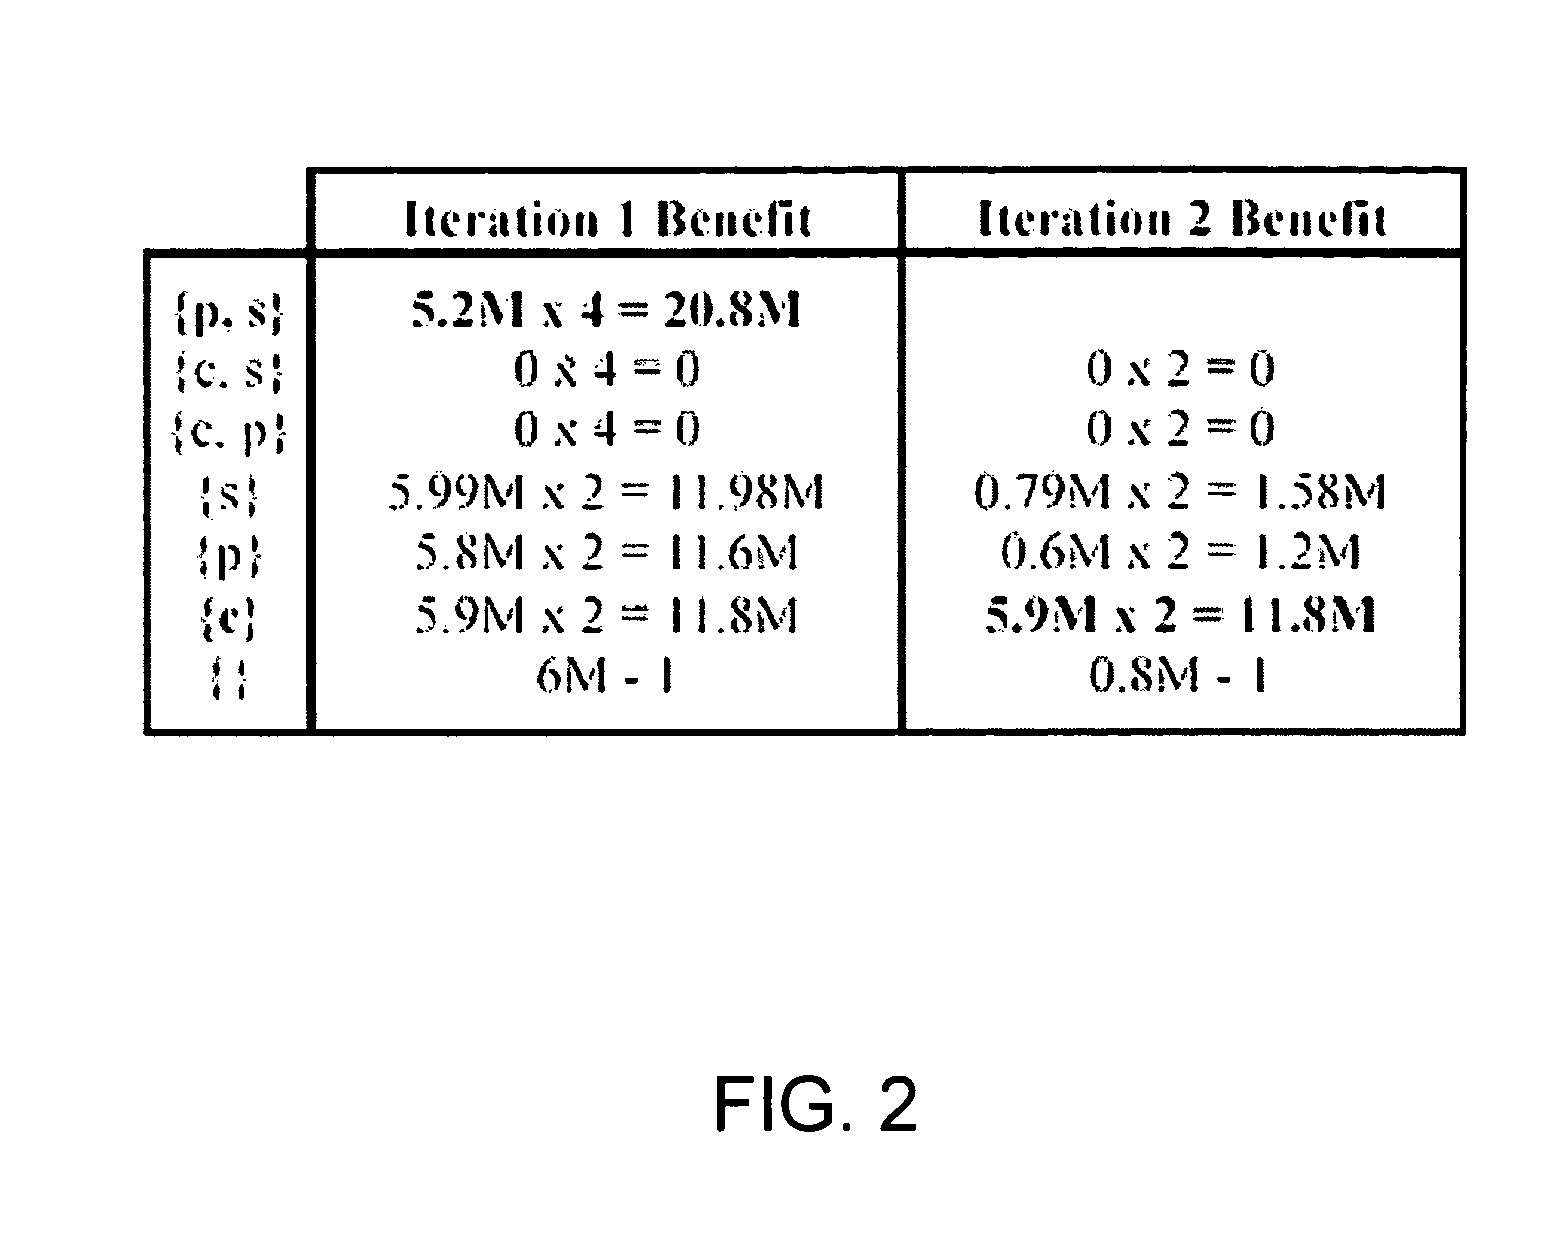 View selection for a multidimensional database